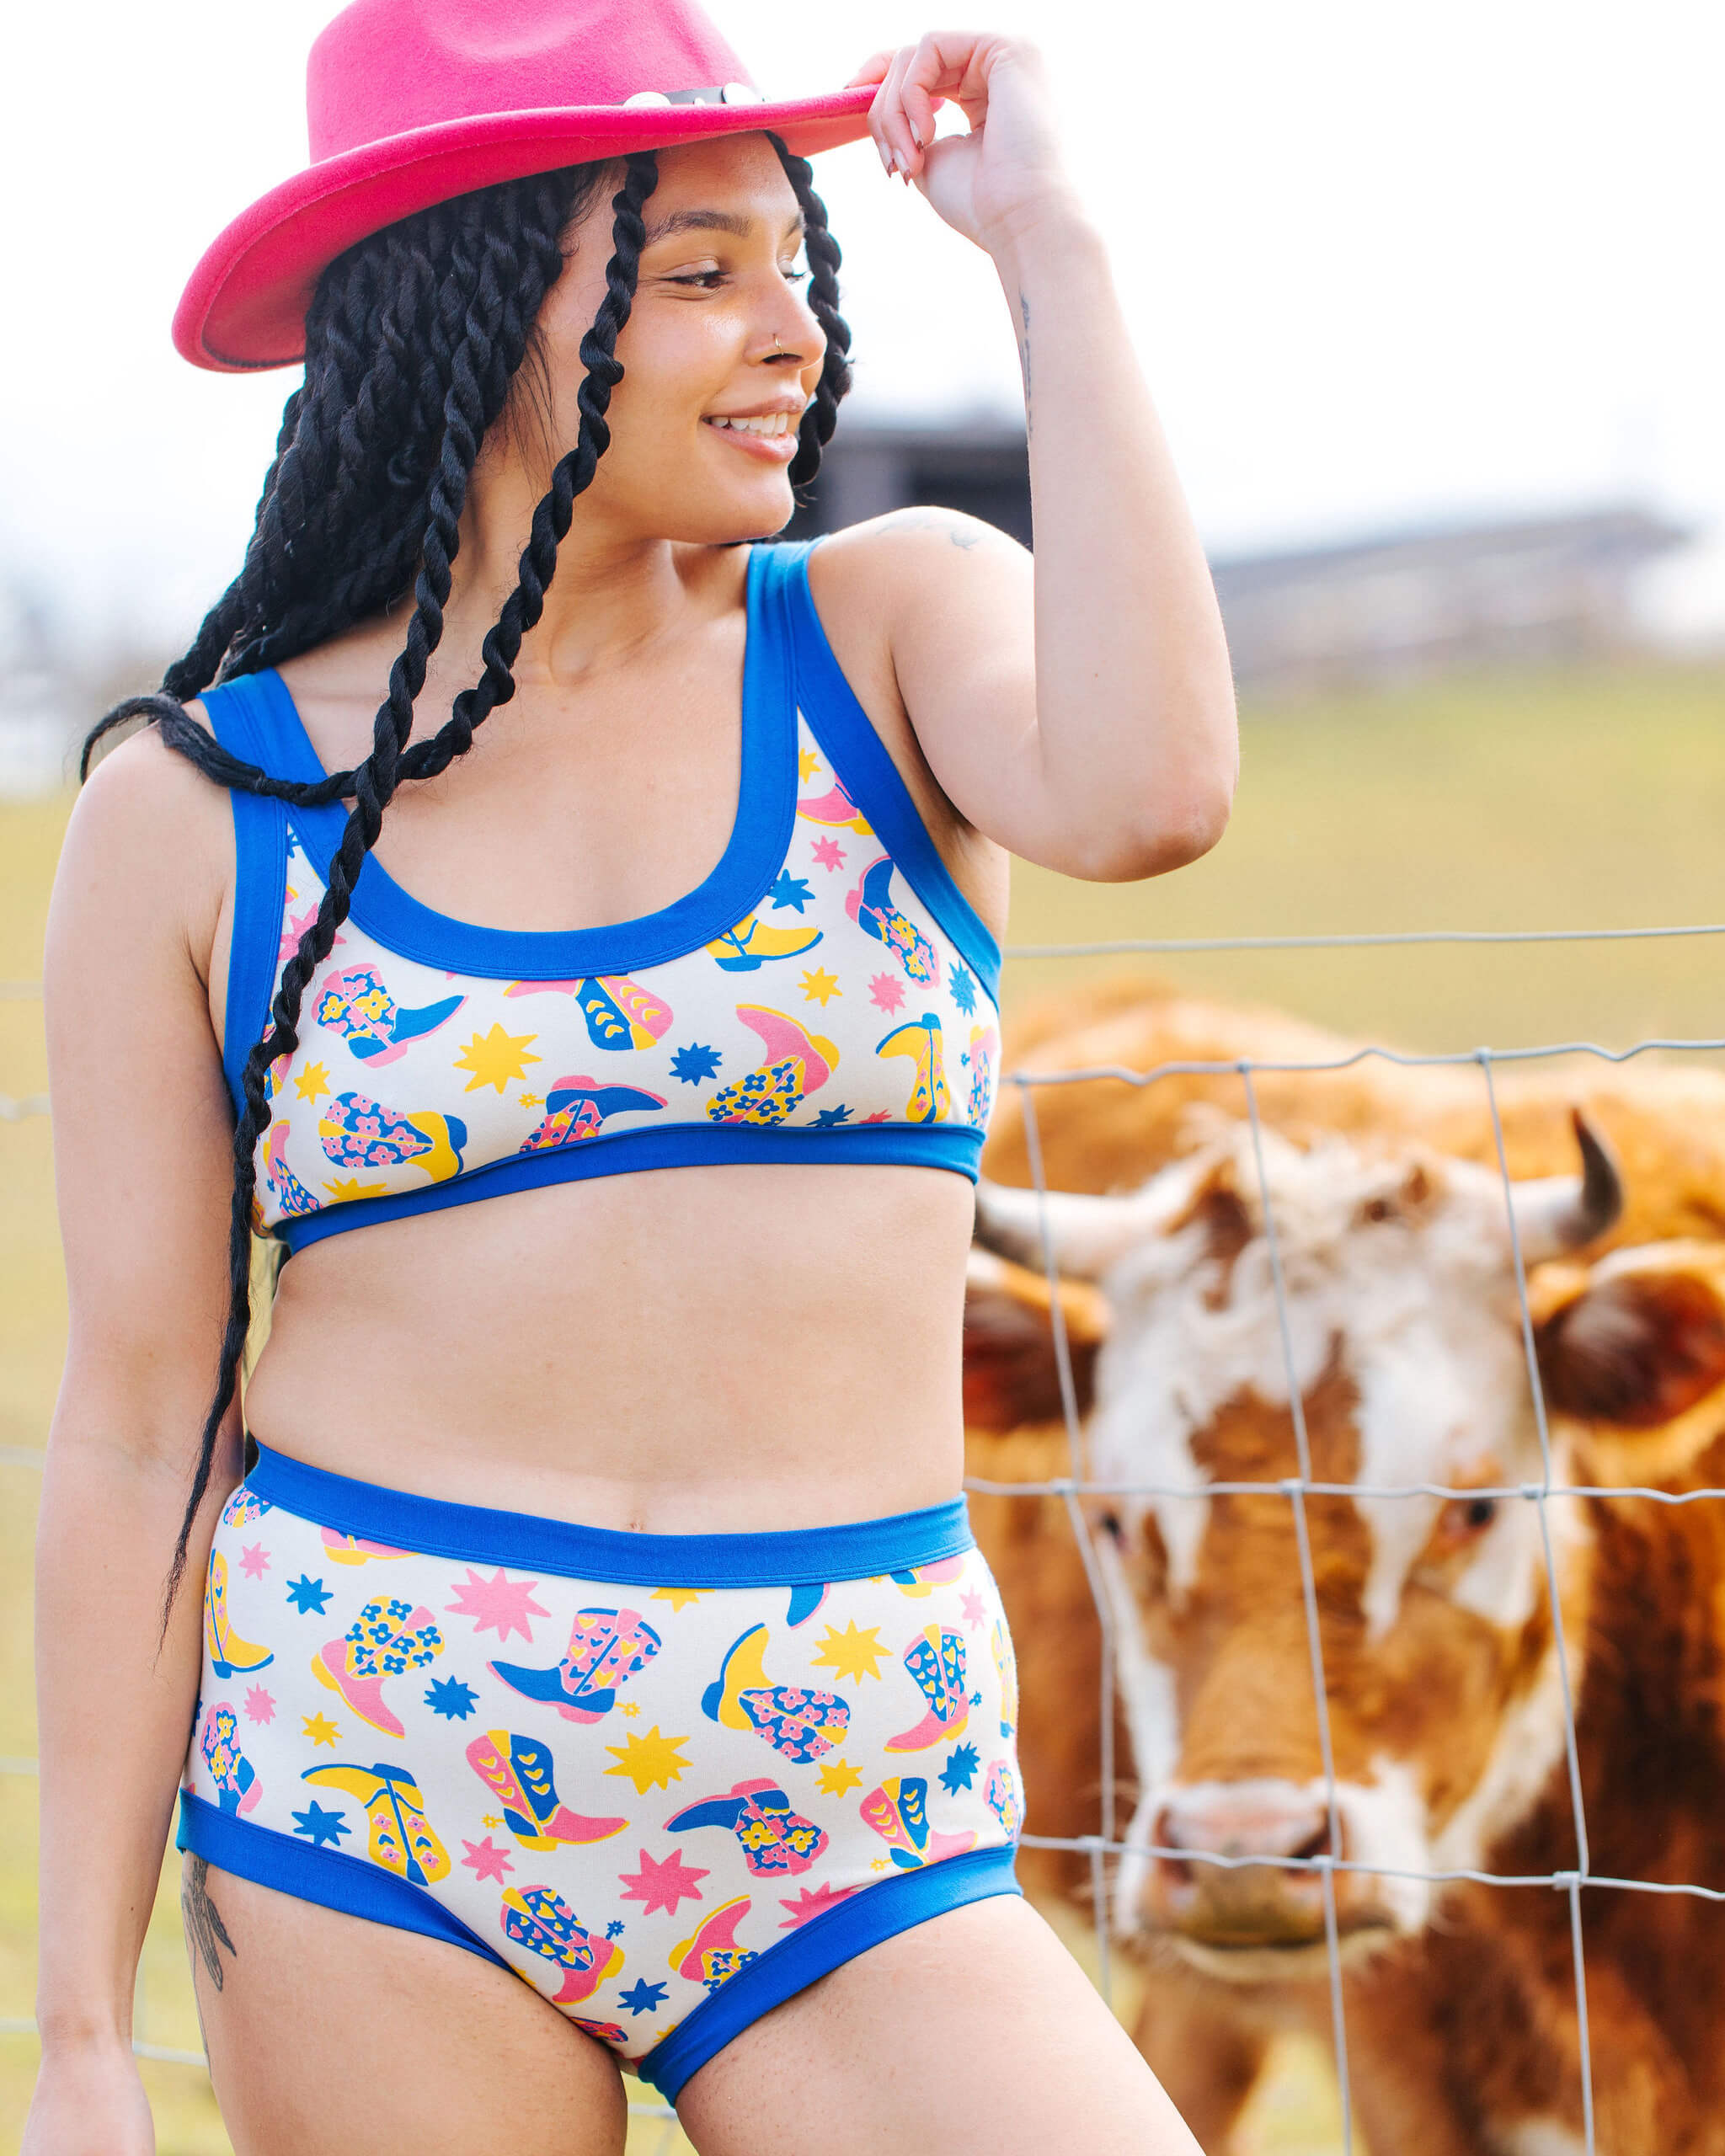 Model wearing a set of Thunderpants Original style underwear and Bralette in Boot Scootin' print.